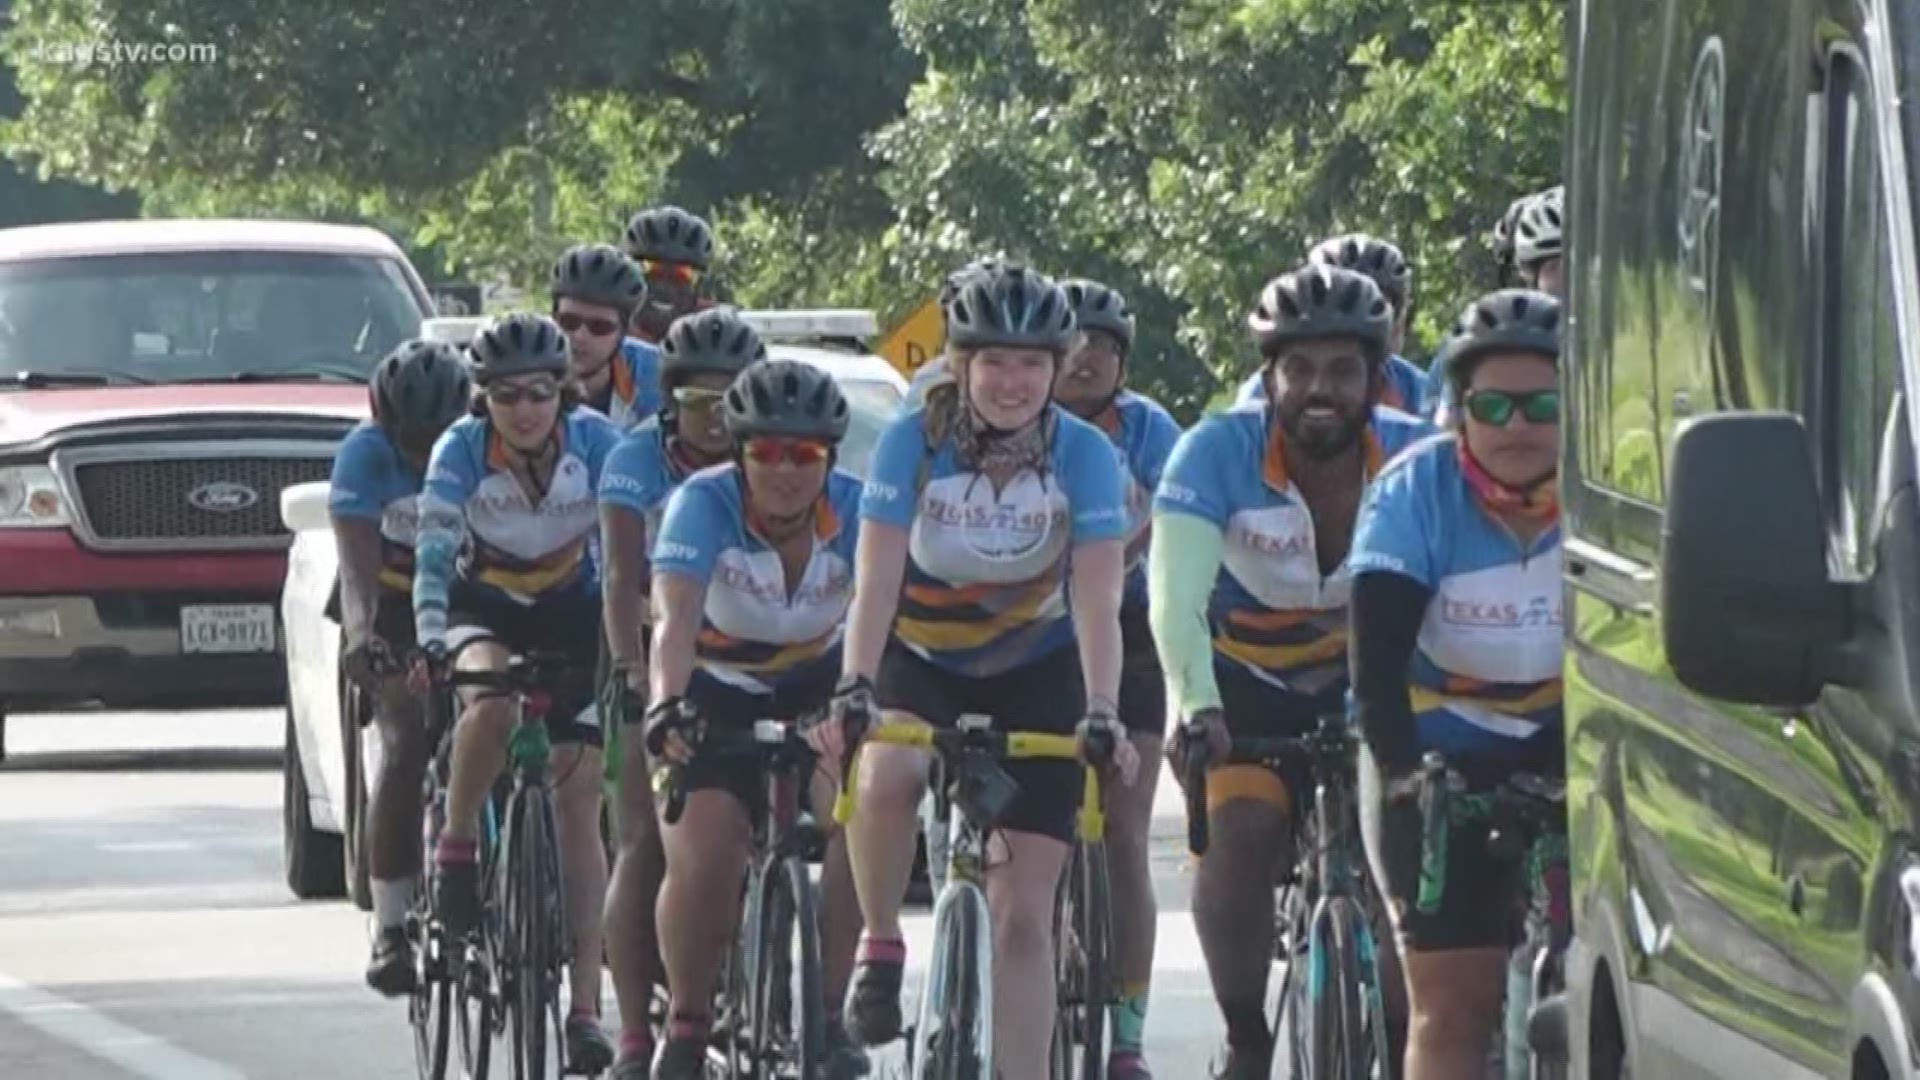 Over 20 University of Texas students rode through College Station in part of a 70-day cross country bike ride to fight cancer.